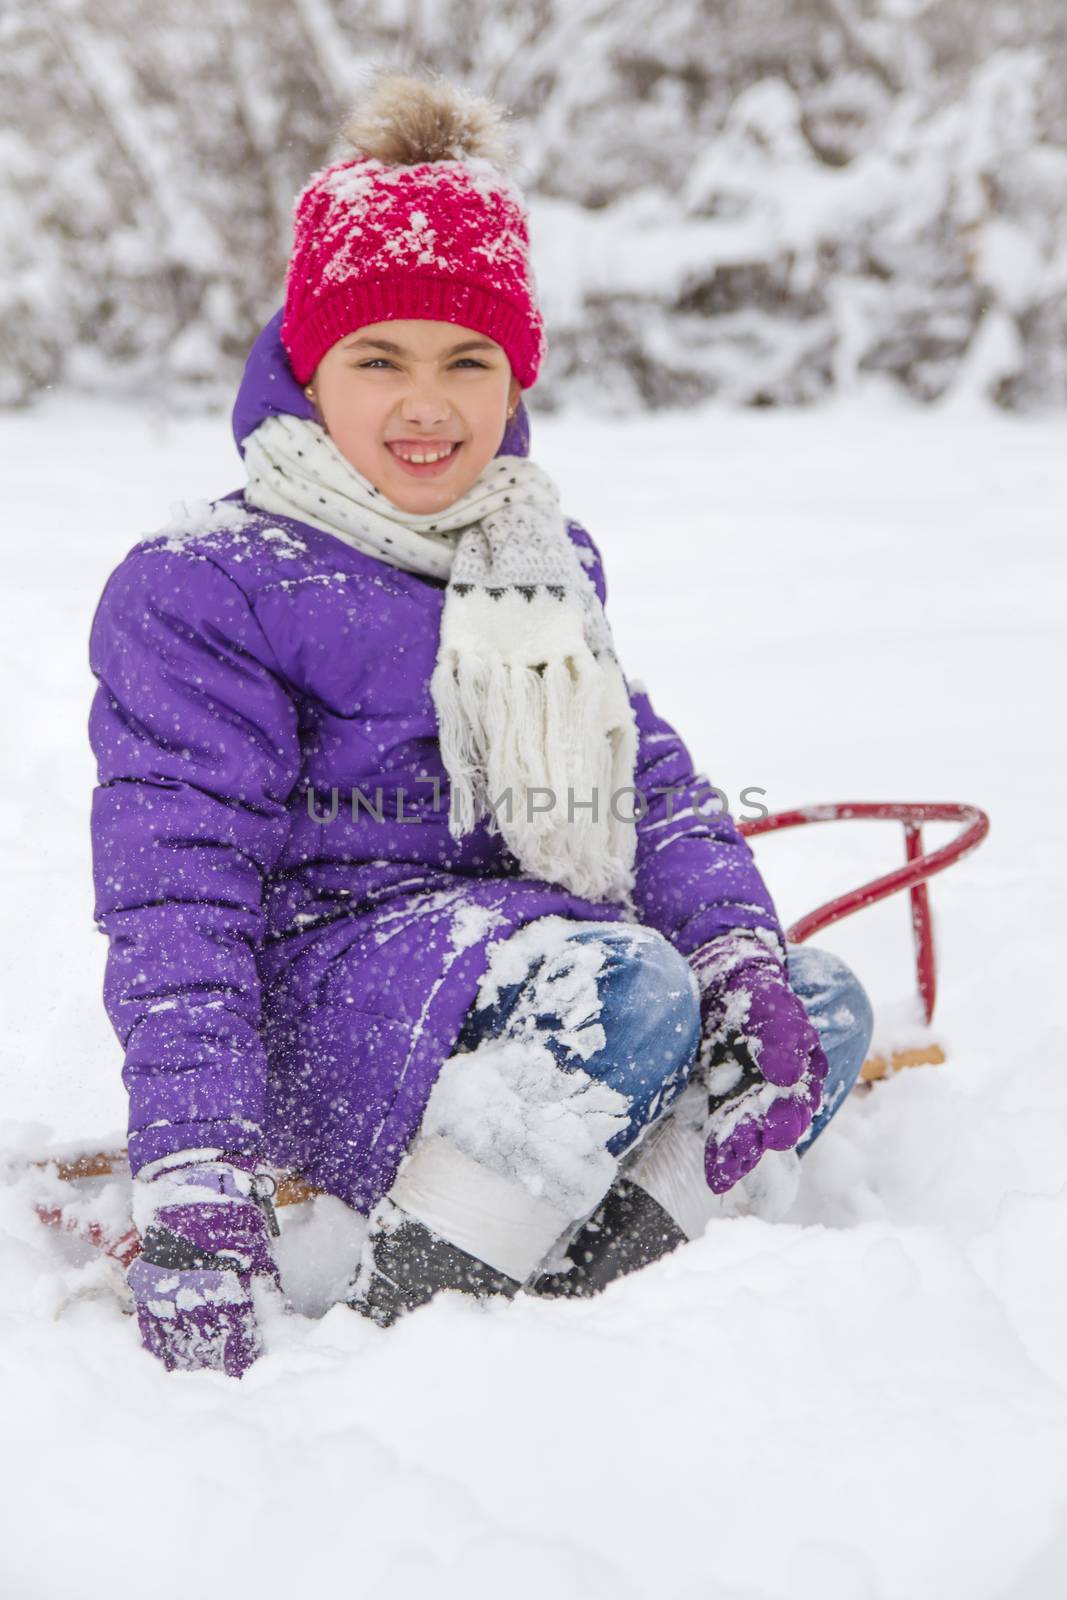 Girl playing in snow in winter park by Angel_a